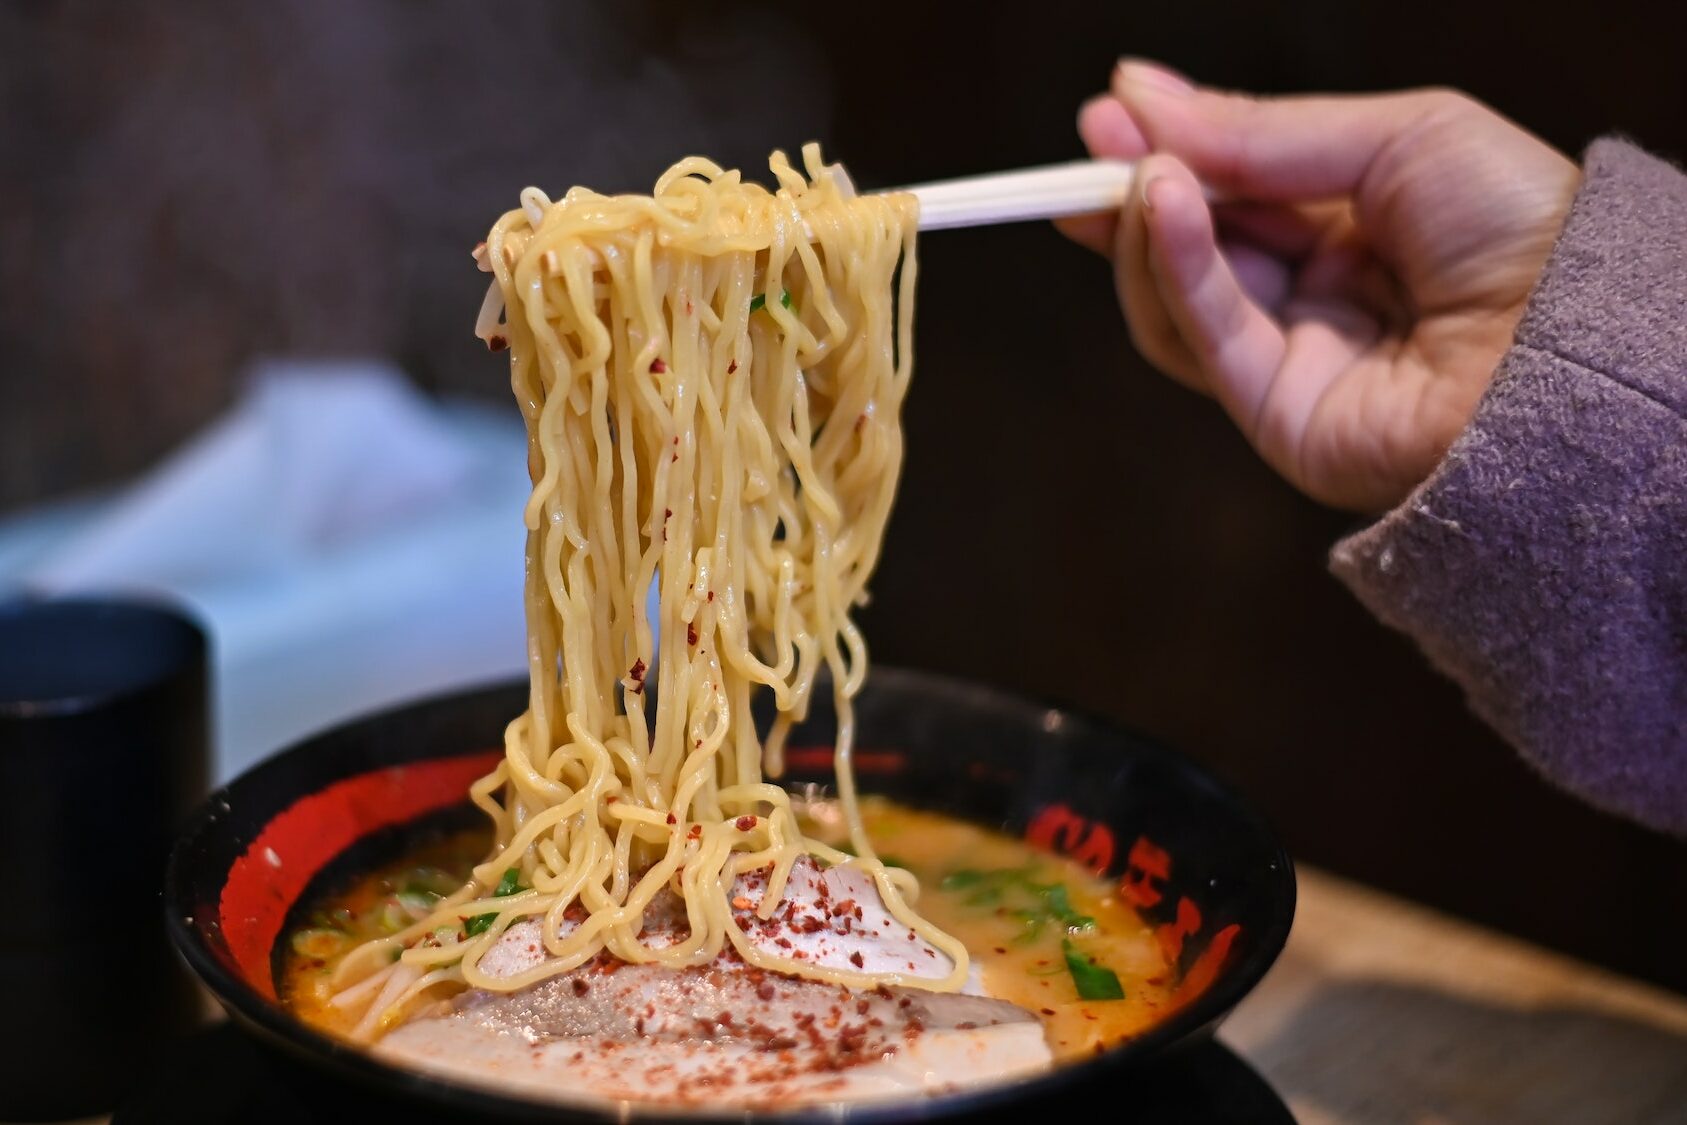 Delicious ramen in Japan with chopstick.